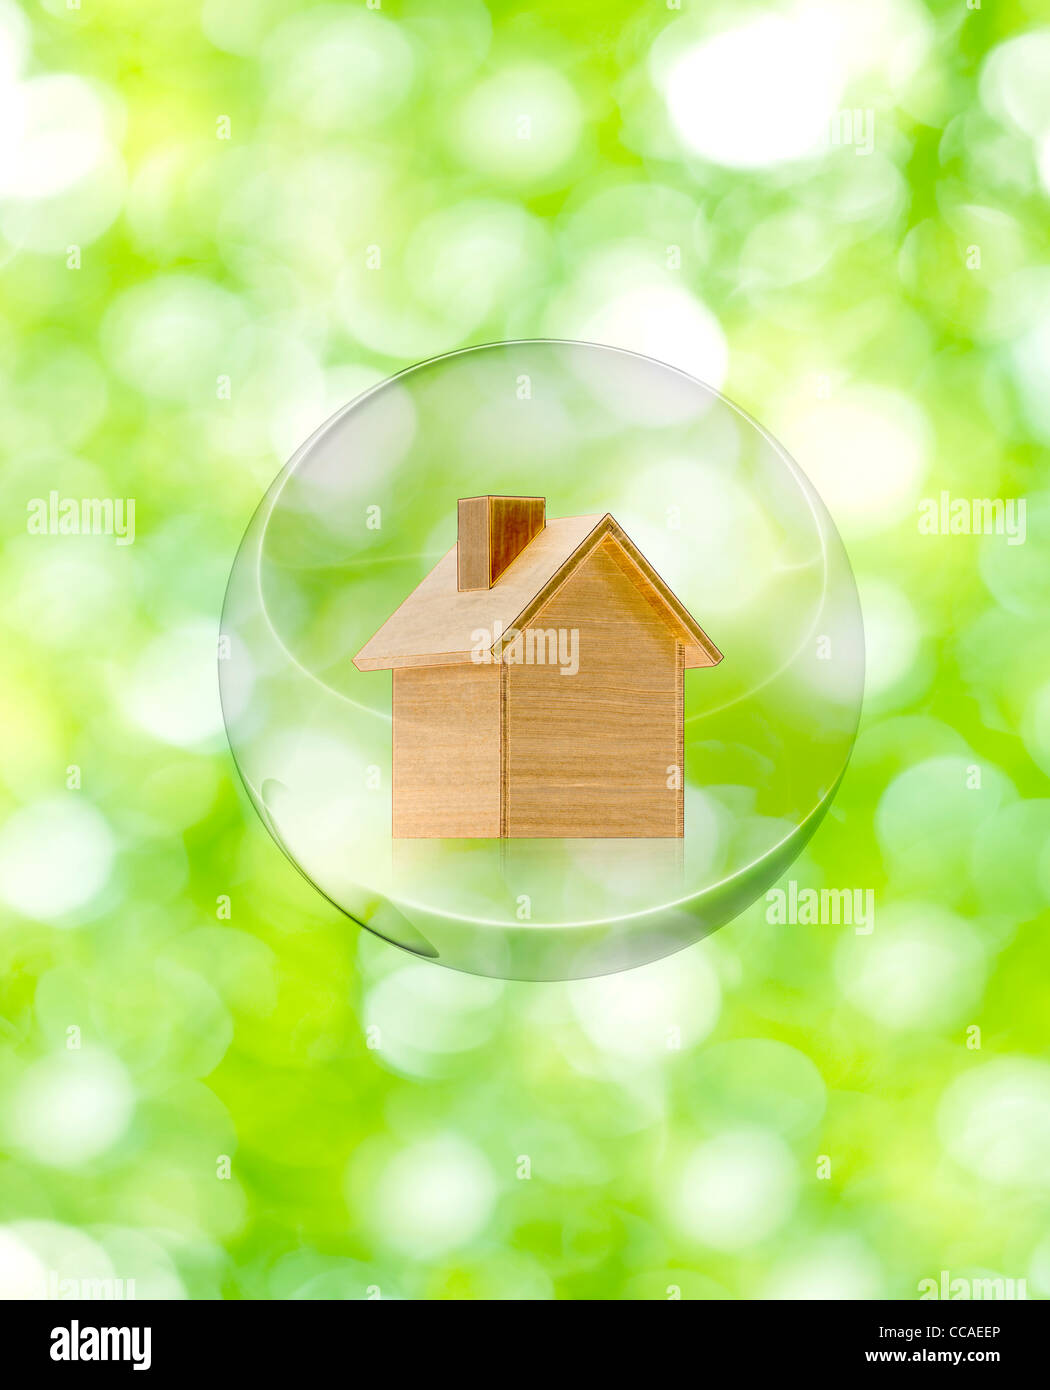 Wooden House in Bubble Stock Photo